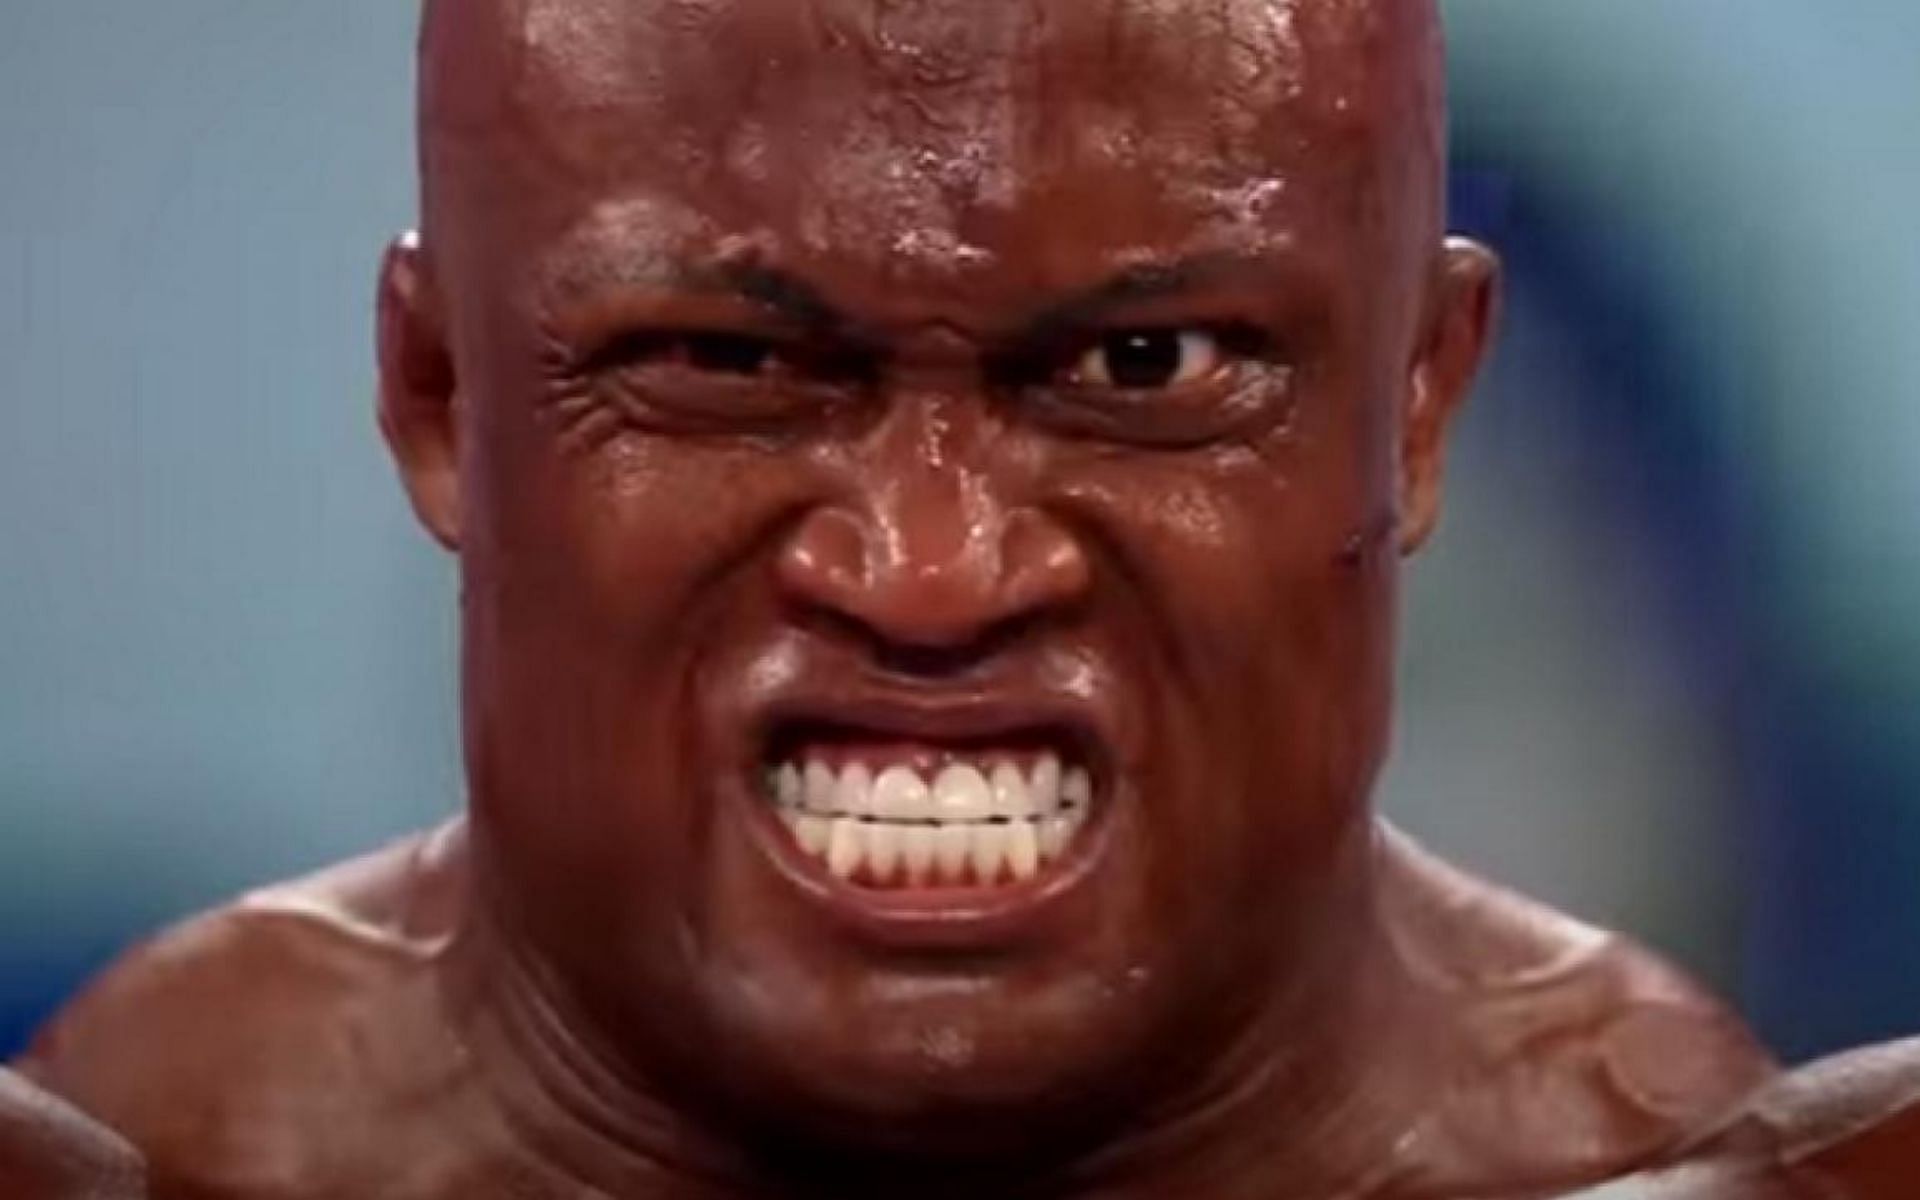 Bobby Lashley made an in-ring return at WrestleMania 38